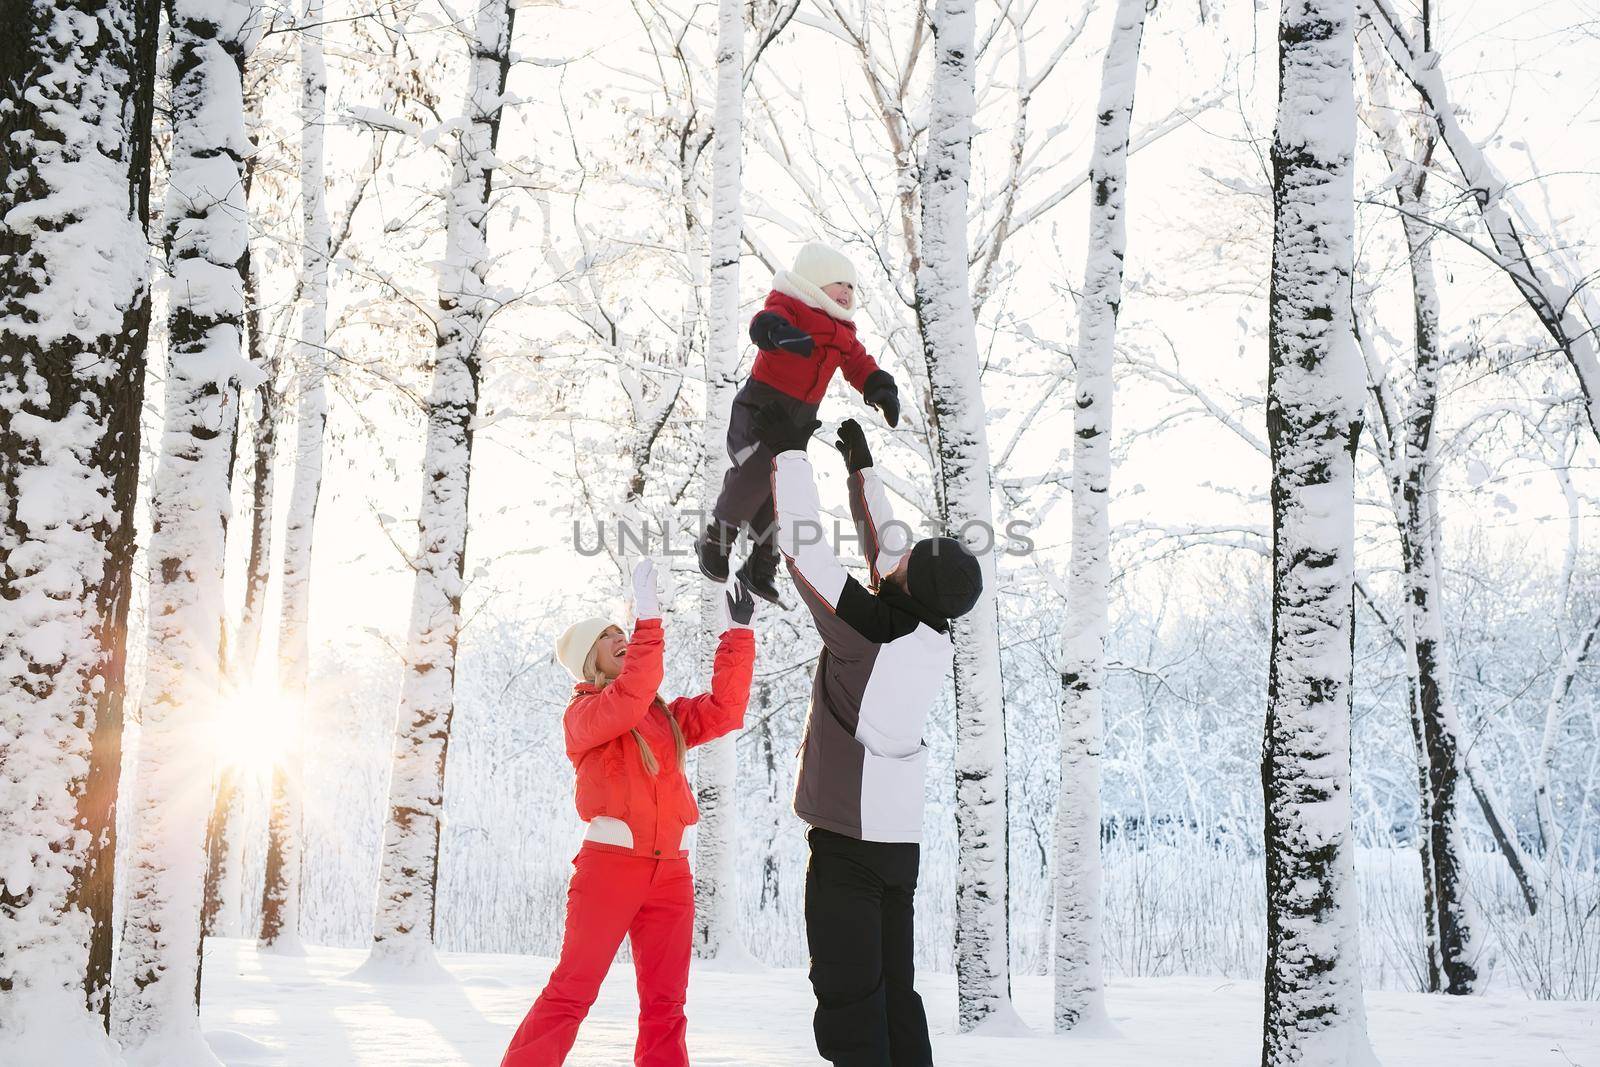 A young family walks in a snowy forest in winter, playing, laughing and throwing their son up.